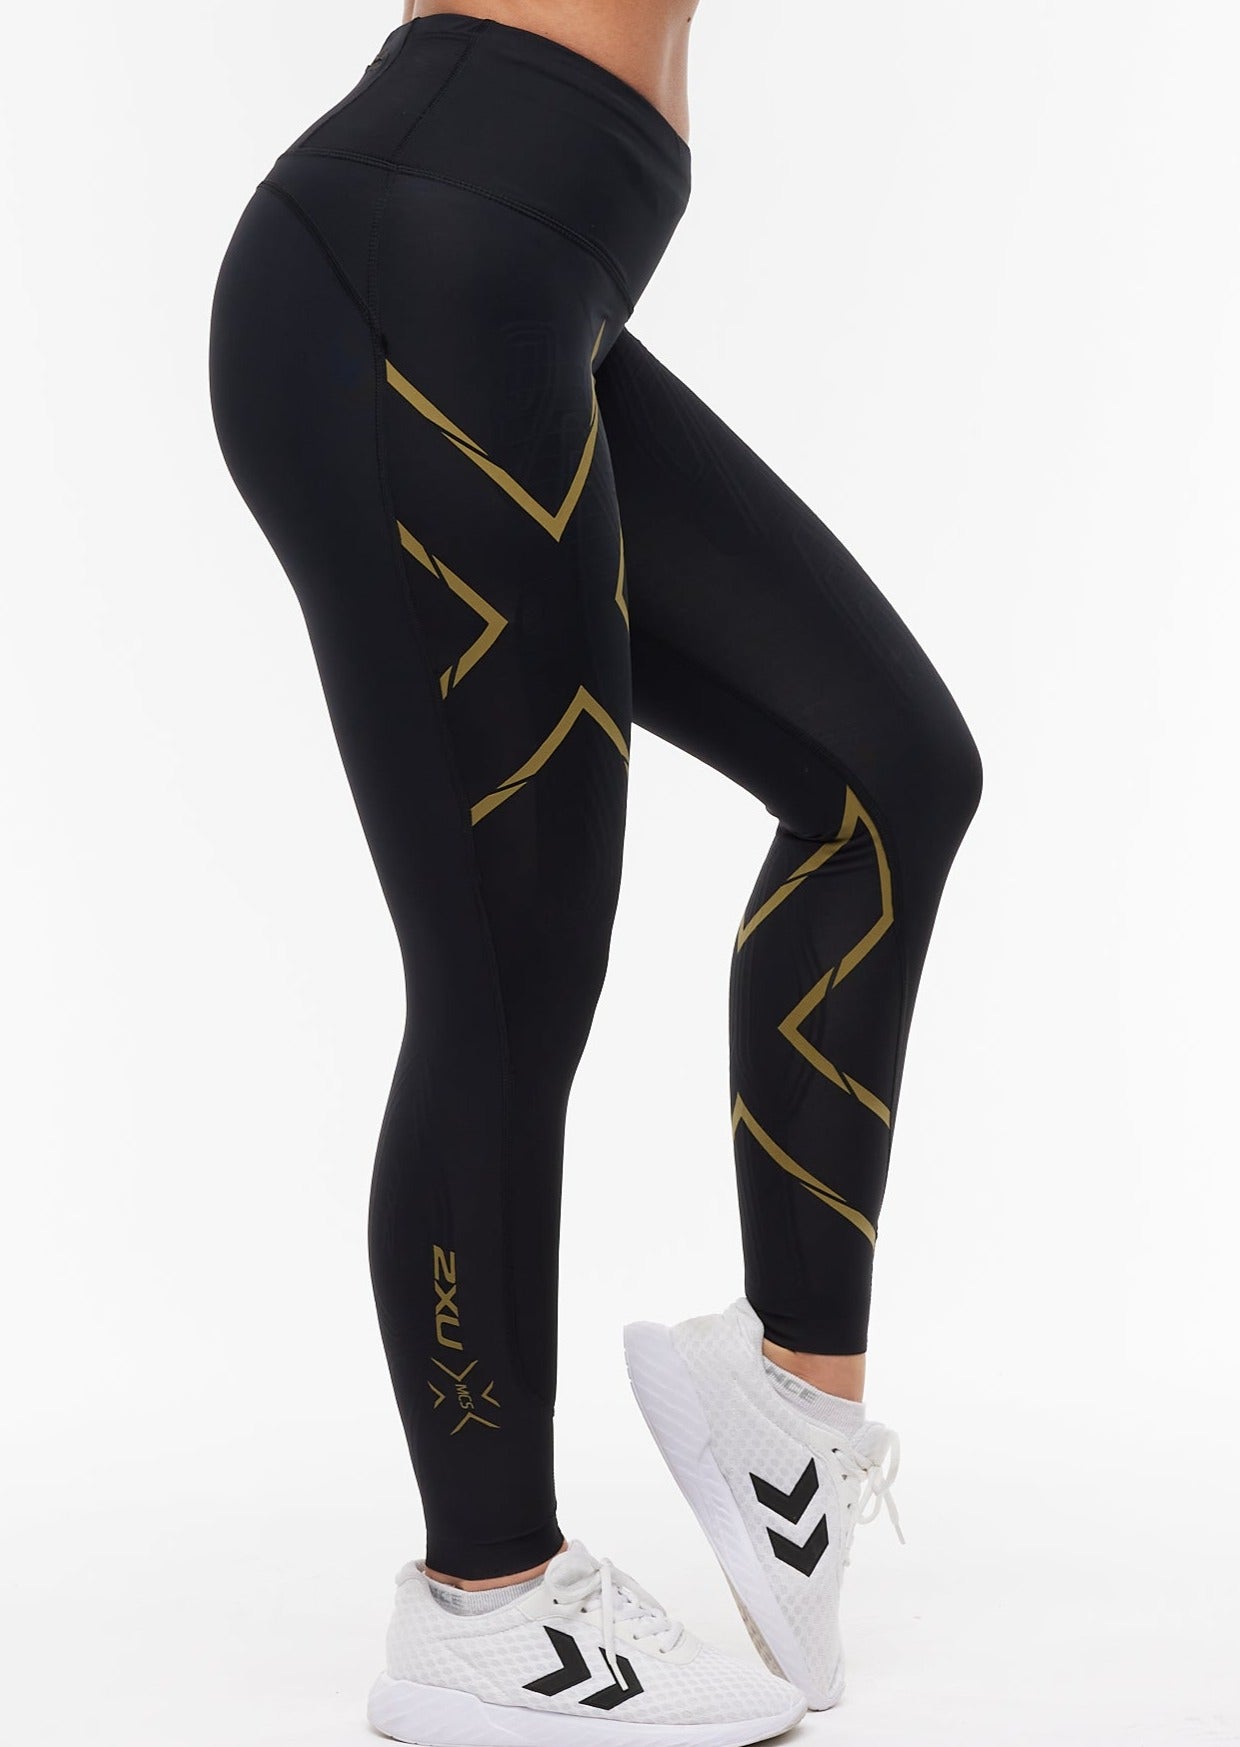 Light Speed Mid-Rise Compression Tights - Black/Gold Reflective - for kvinde - 2XU - Tights